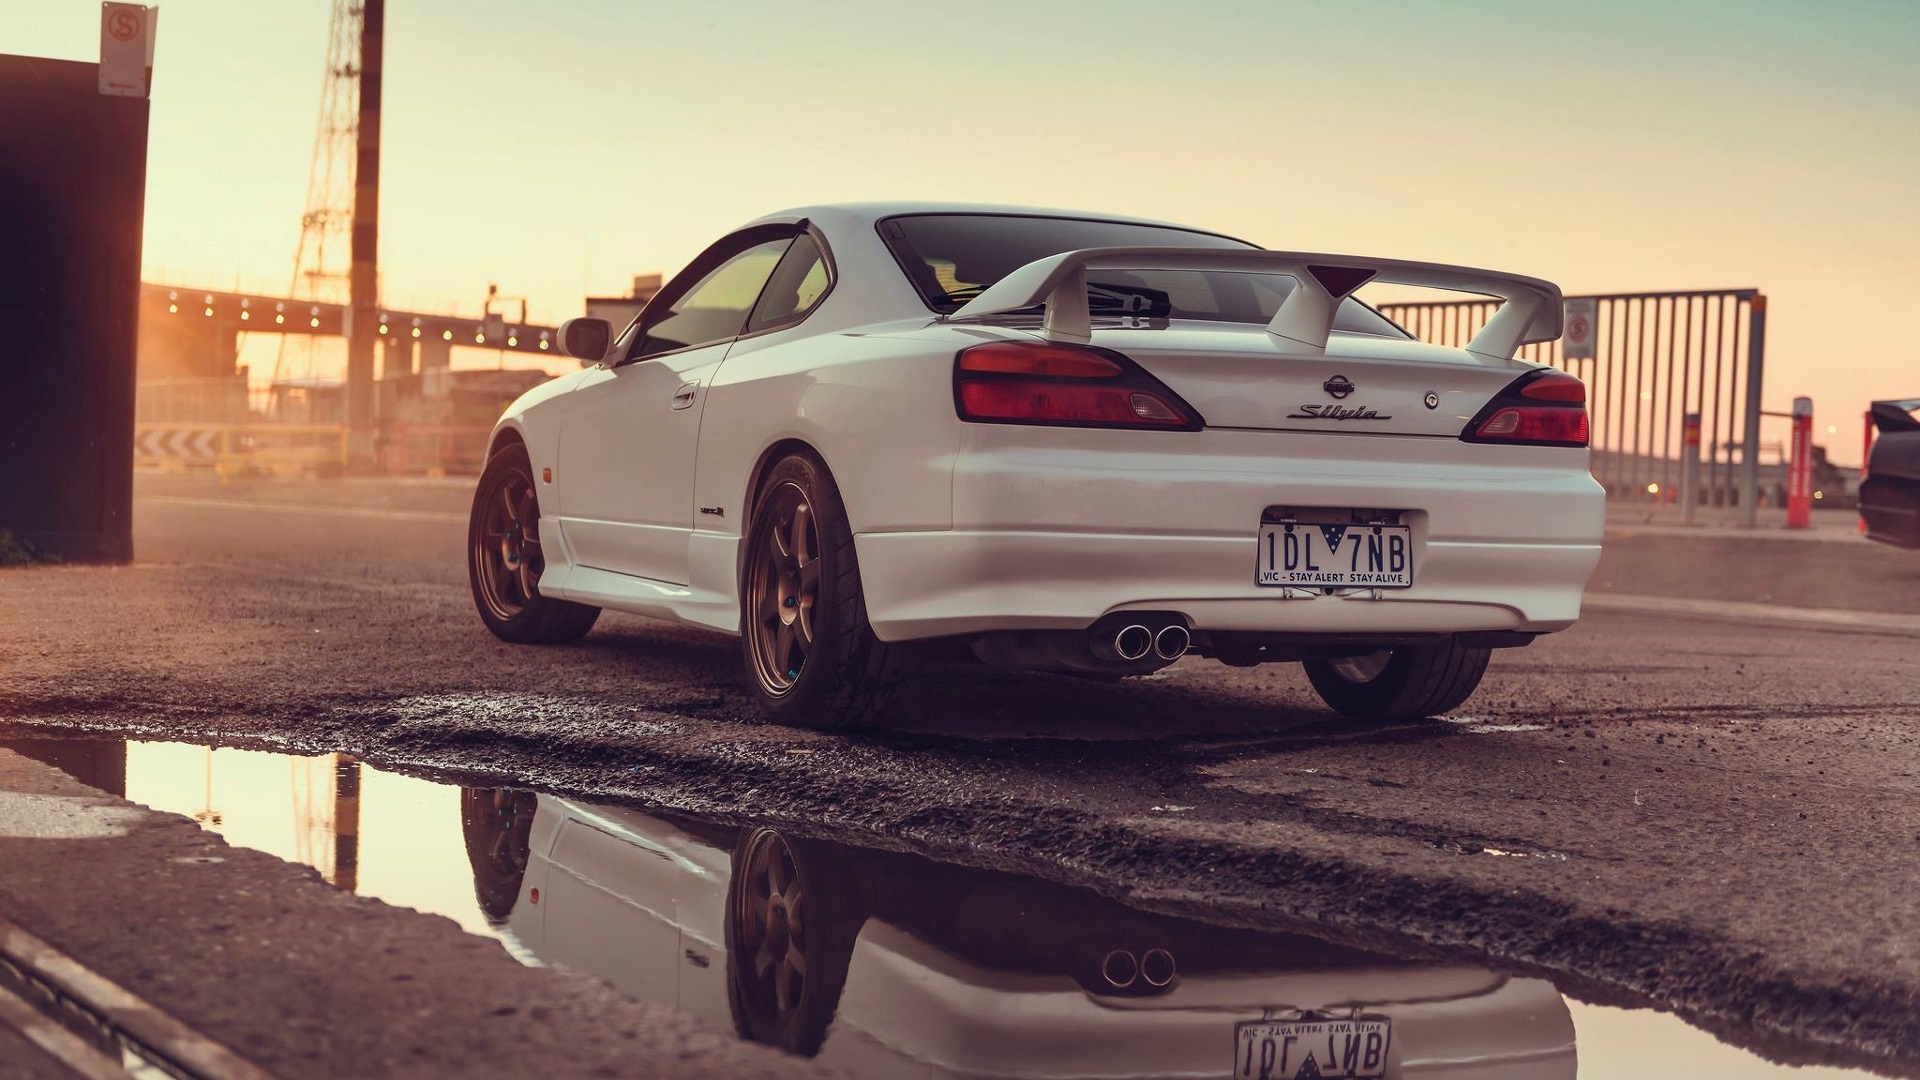 General 1920x1080 Nissan Silvia Nissan 200SX Nissan Japanese cars white cars car vehicle reflection sports car water puddle Nissan Silvia S15 outdoors PT works